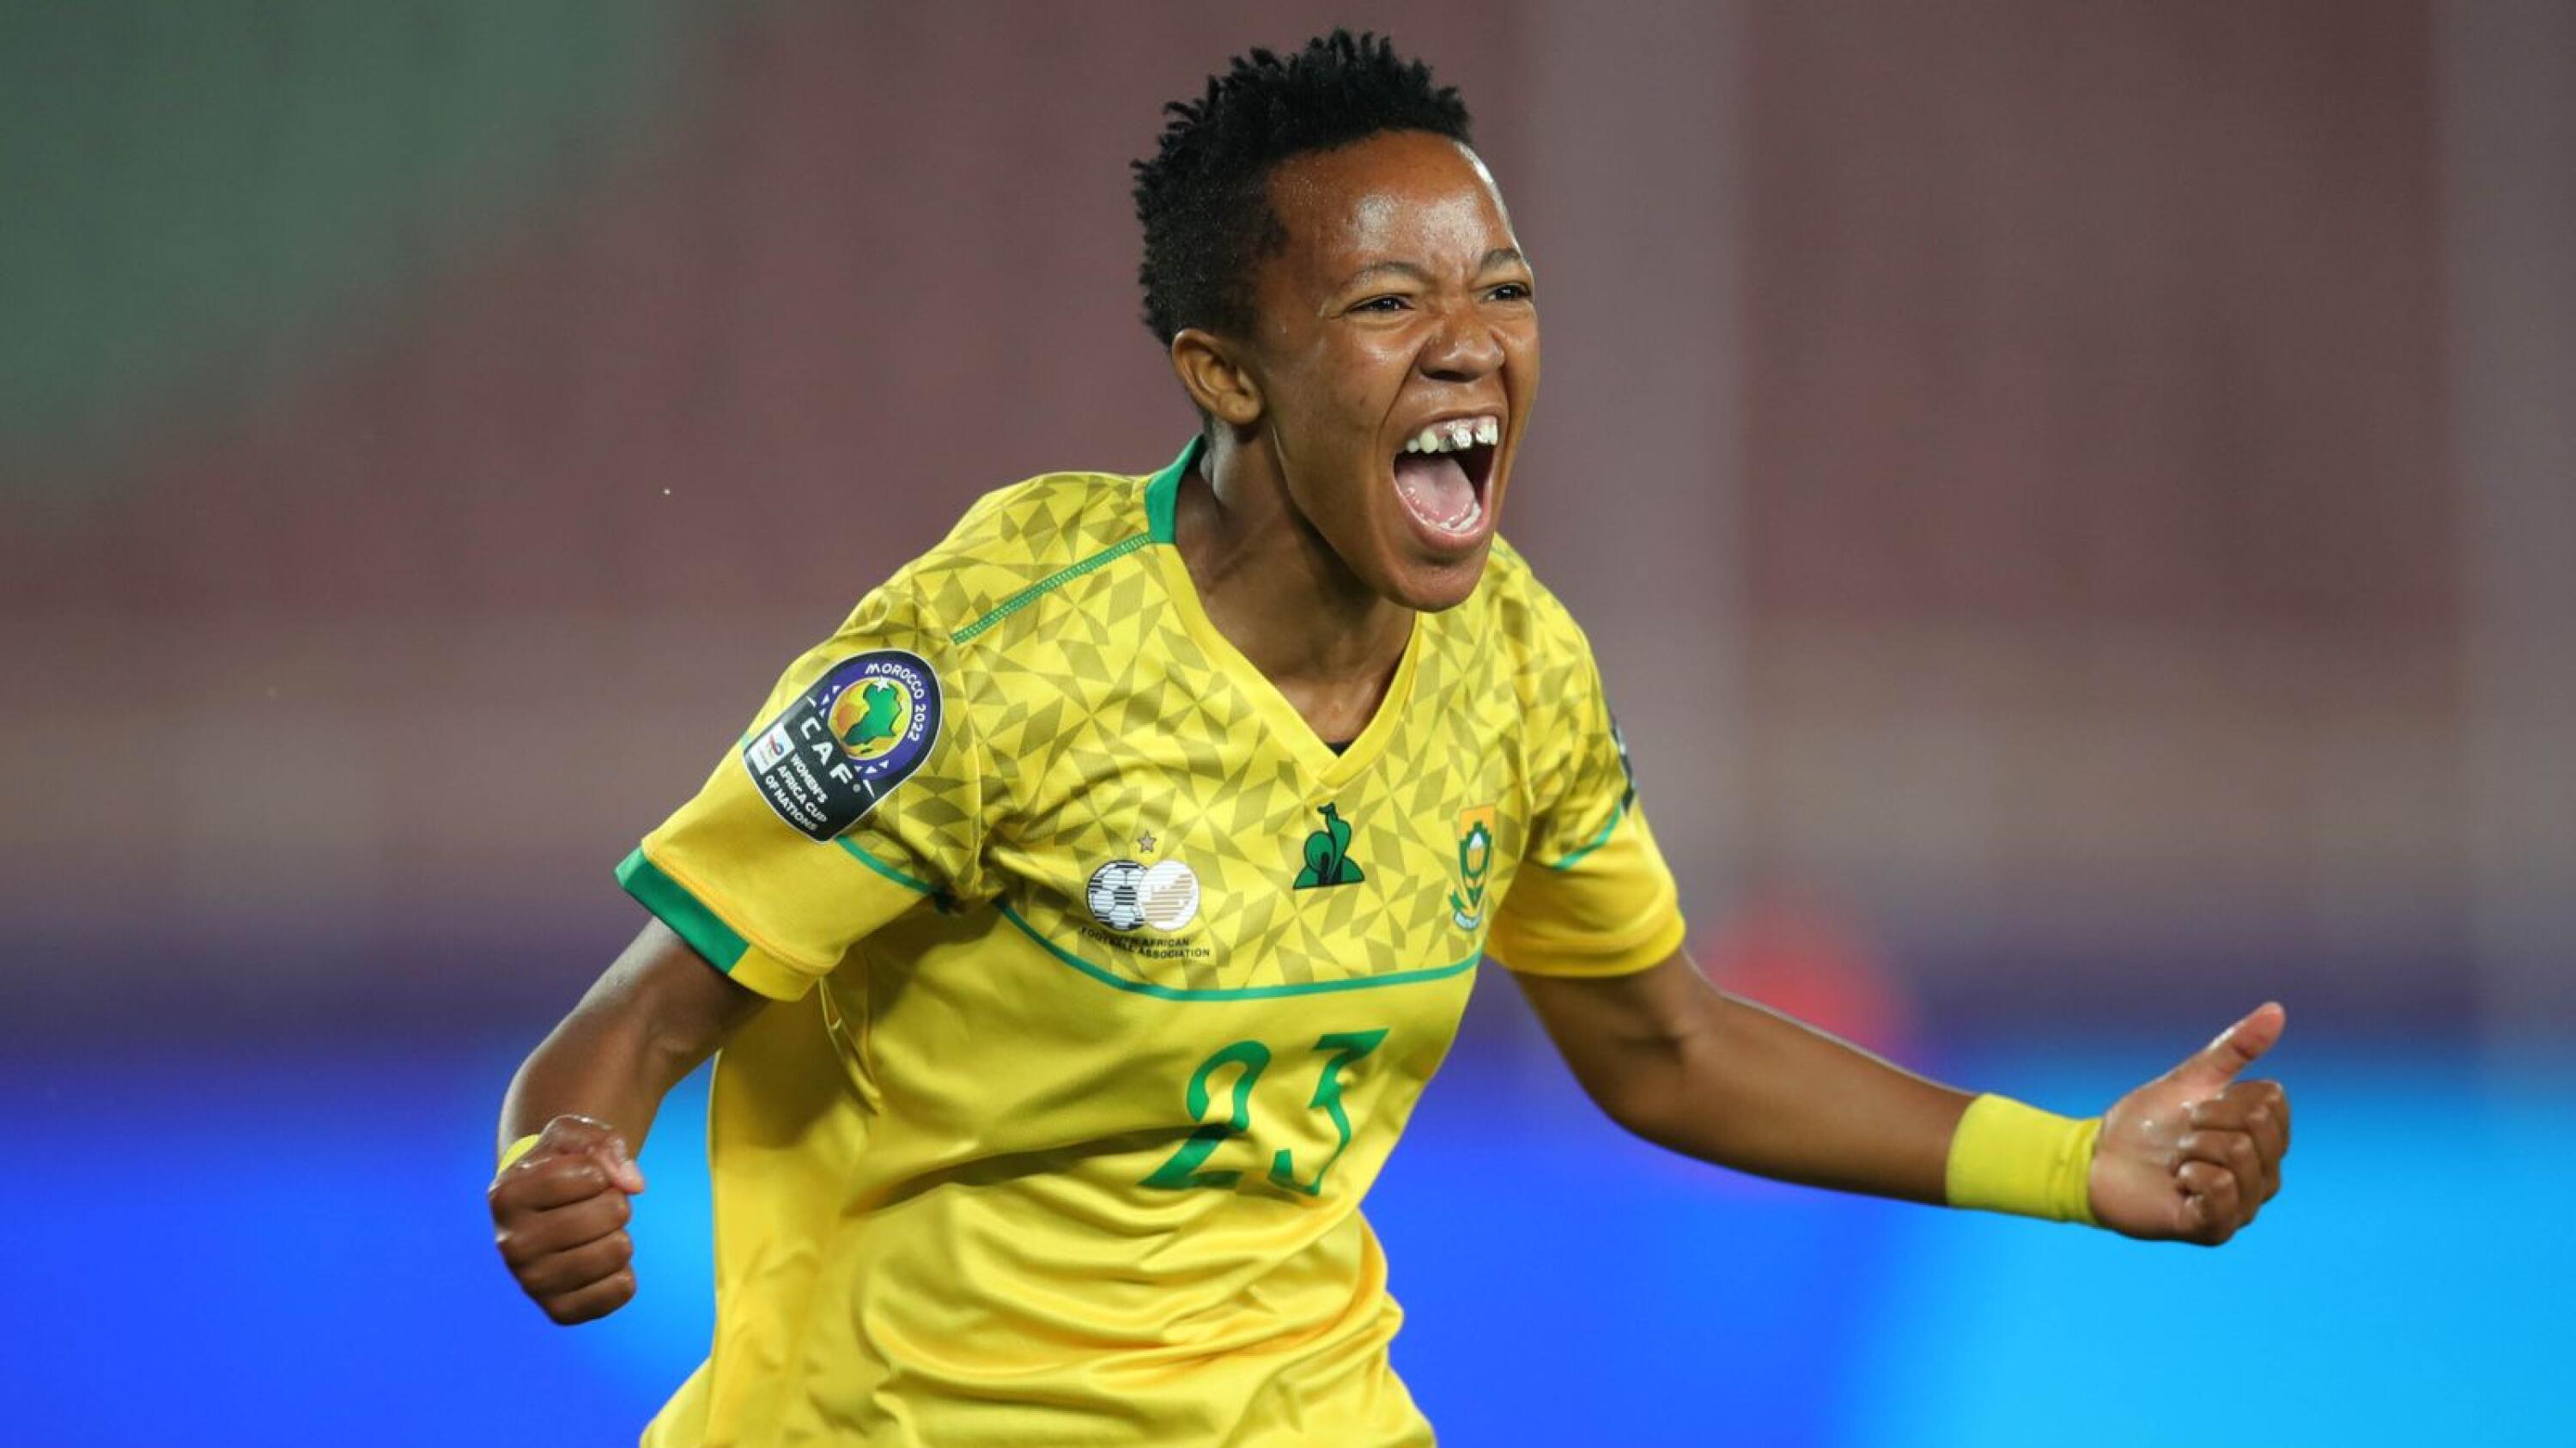 Nthabiseng Ronisha Majiya of South Africa celebrates her goal during the 2022 Women’s Africa Cup of Nations match against Botswana at Prince Moulay Abdellah Stadium, Rabat